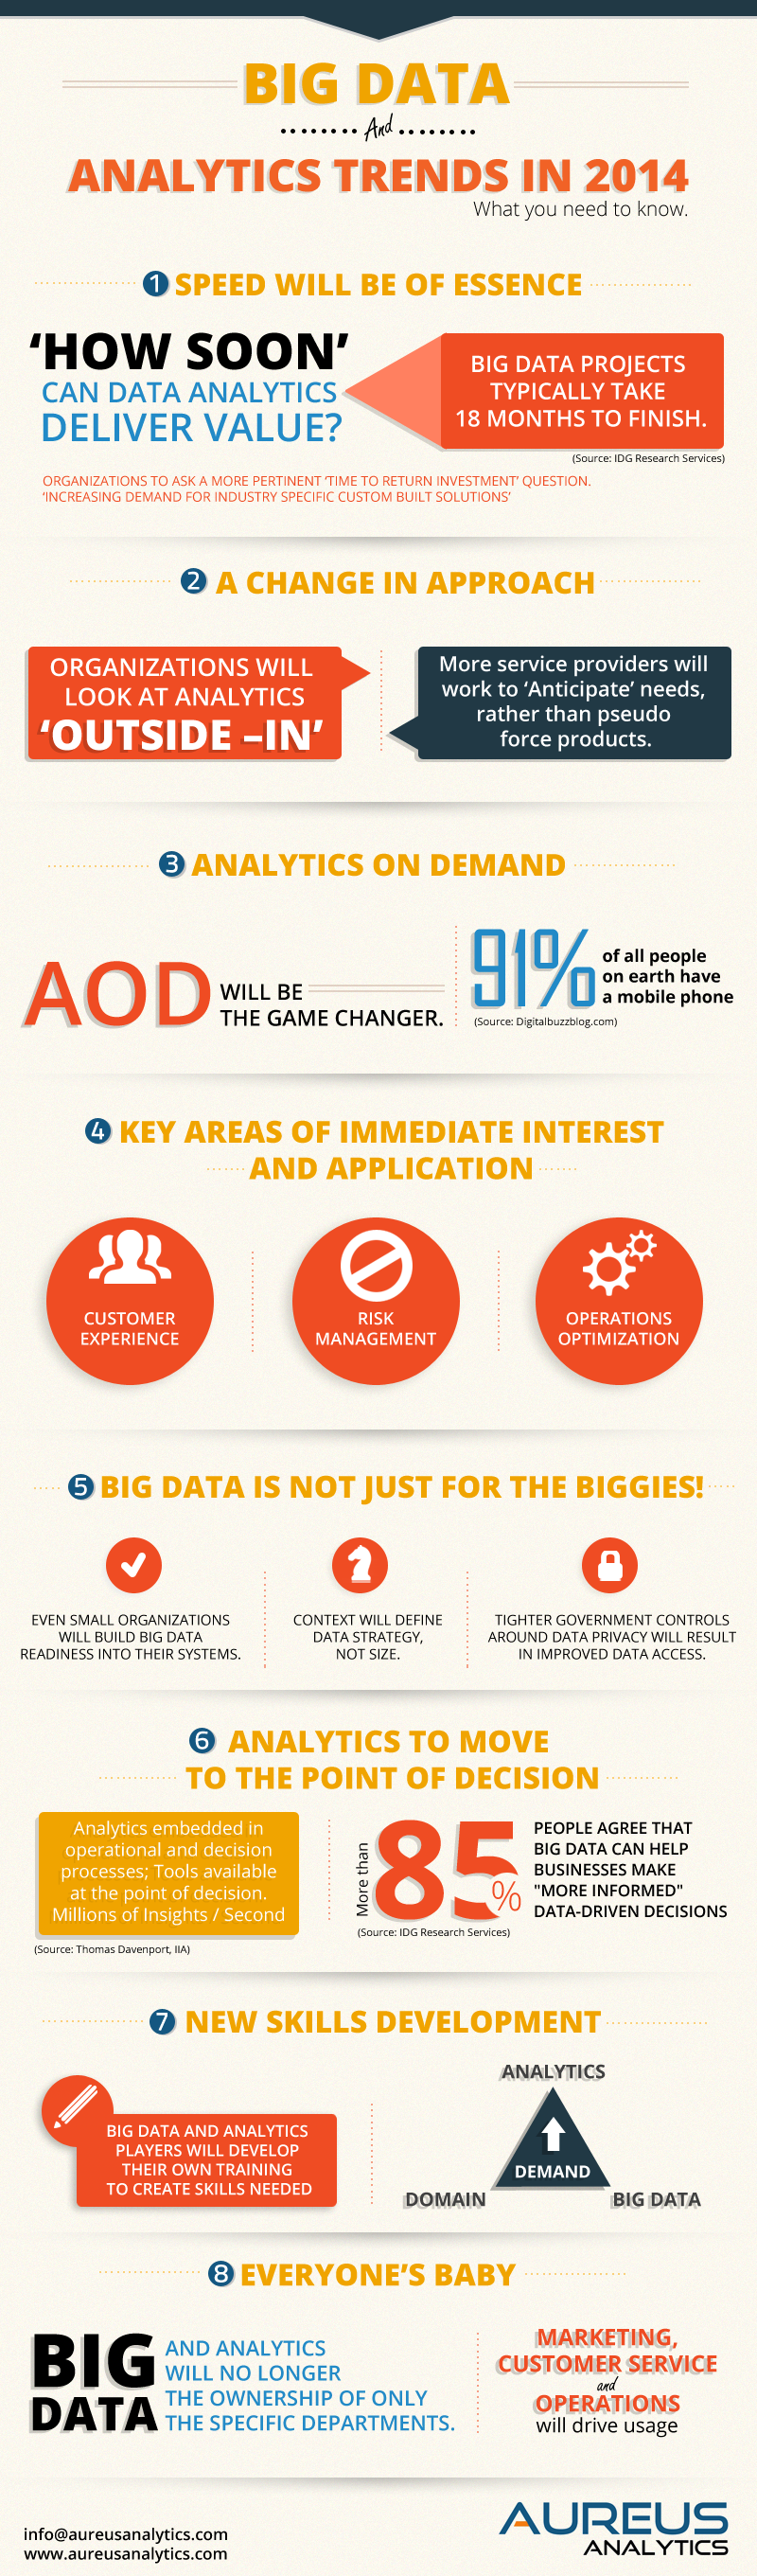 Big Data Analytic Trends for 2014